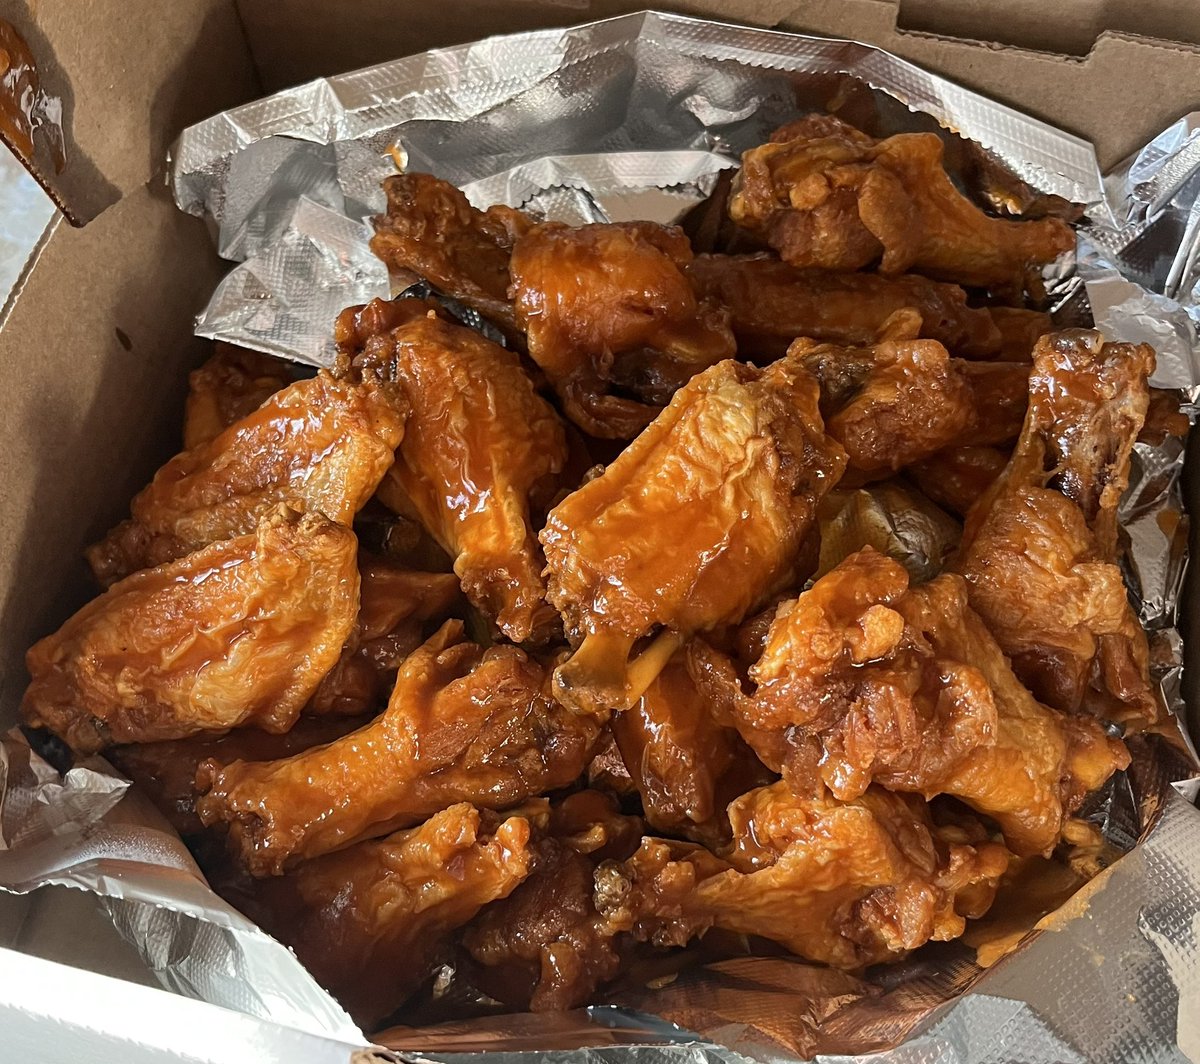 We finally got to try @macysplacepizzeria at 3100 Delaware Ave in Kenmore, NY. Dollar Wing Wednesday’s are not only one of the best deals around, the #wings are fantastic! #pizza #kenmoreny #onebuffalo #buffalony